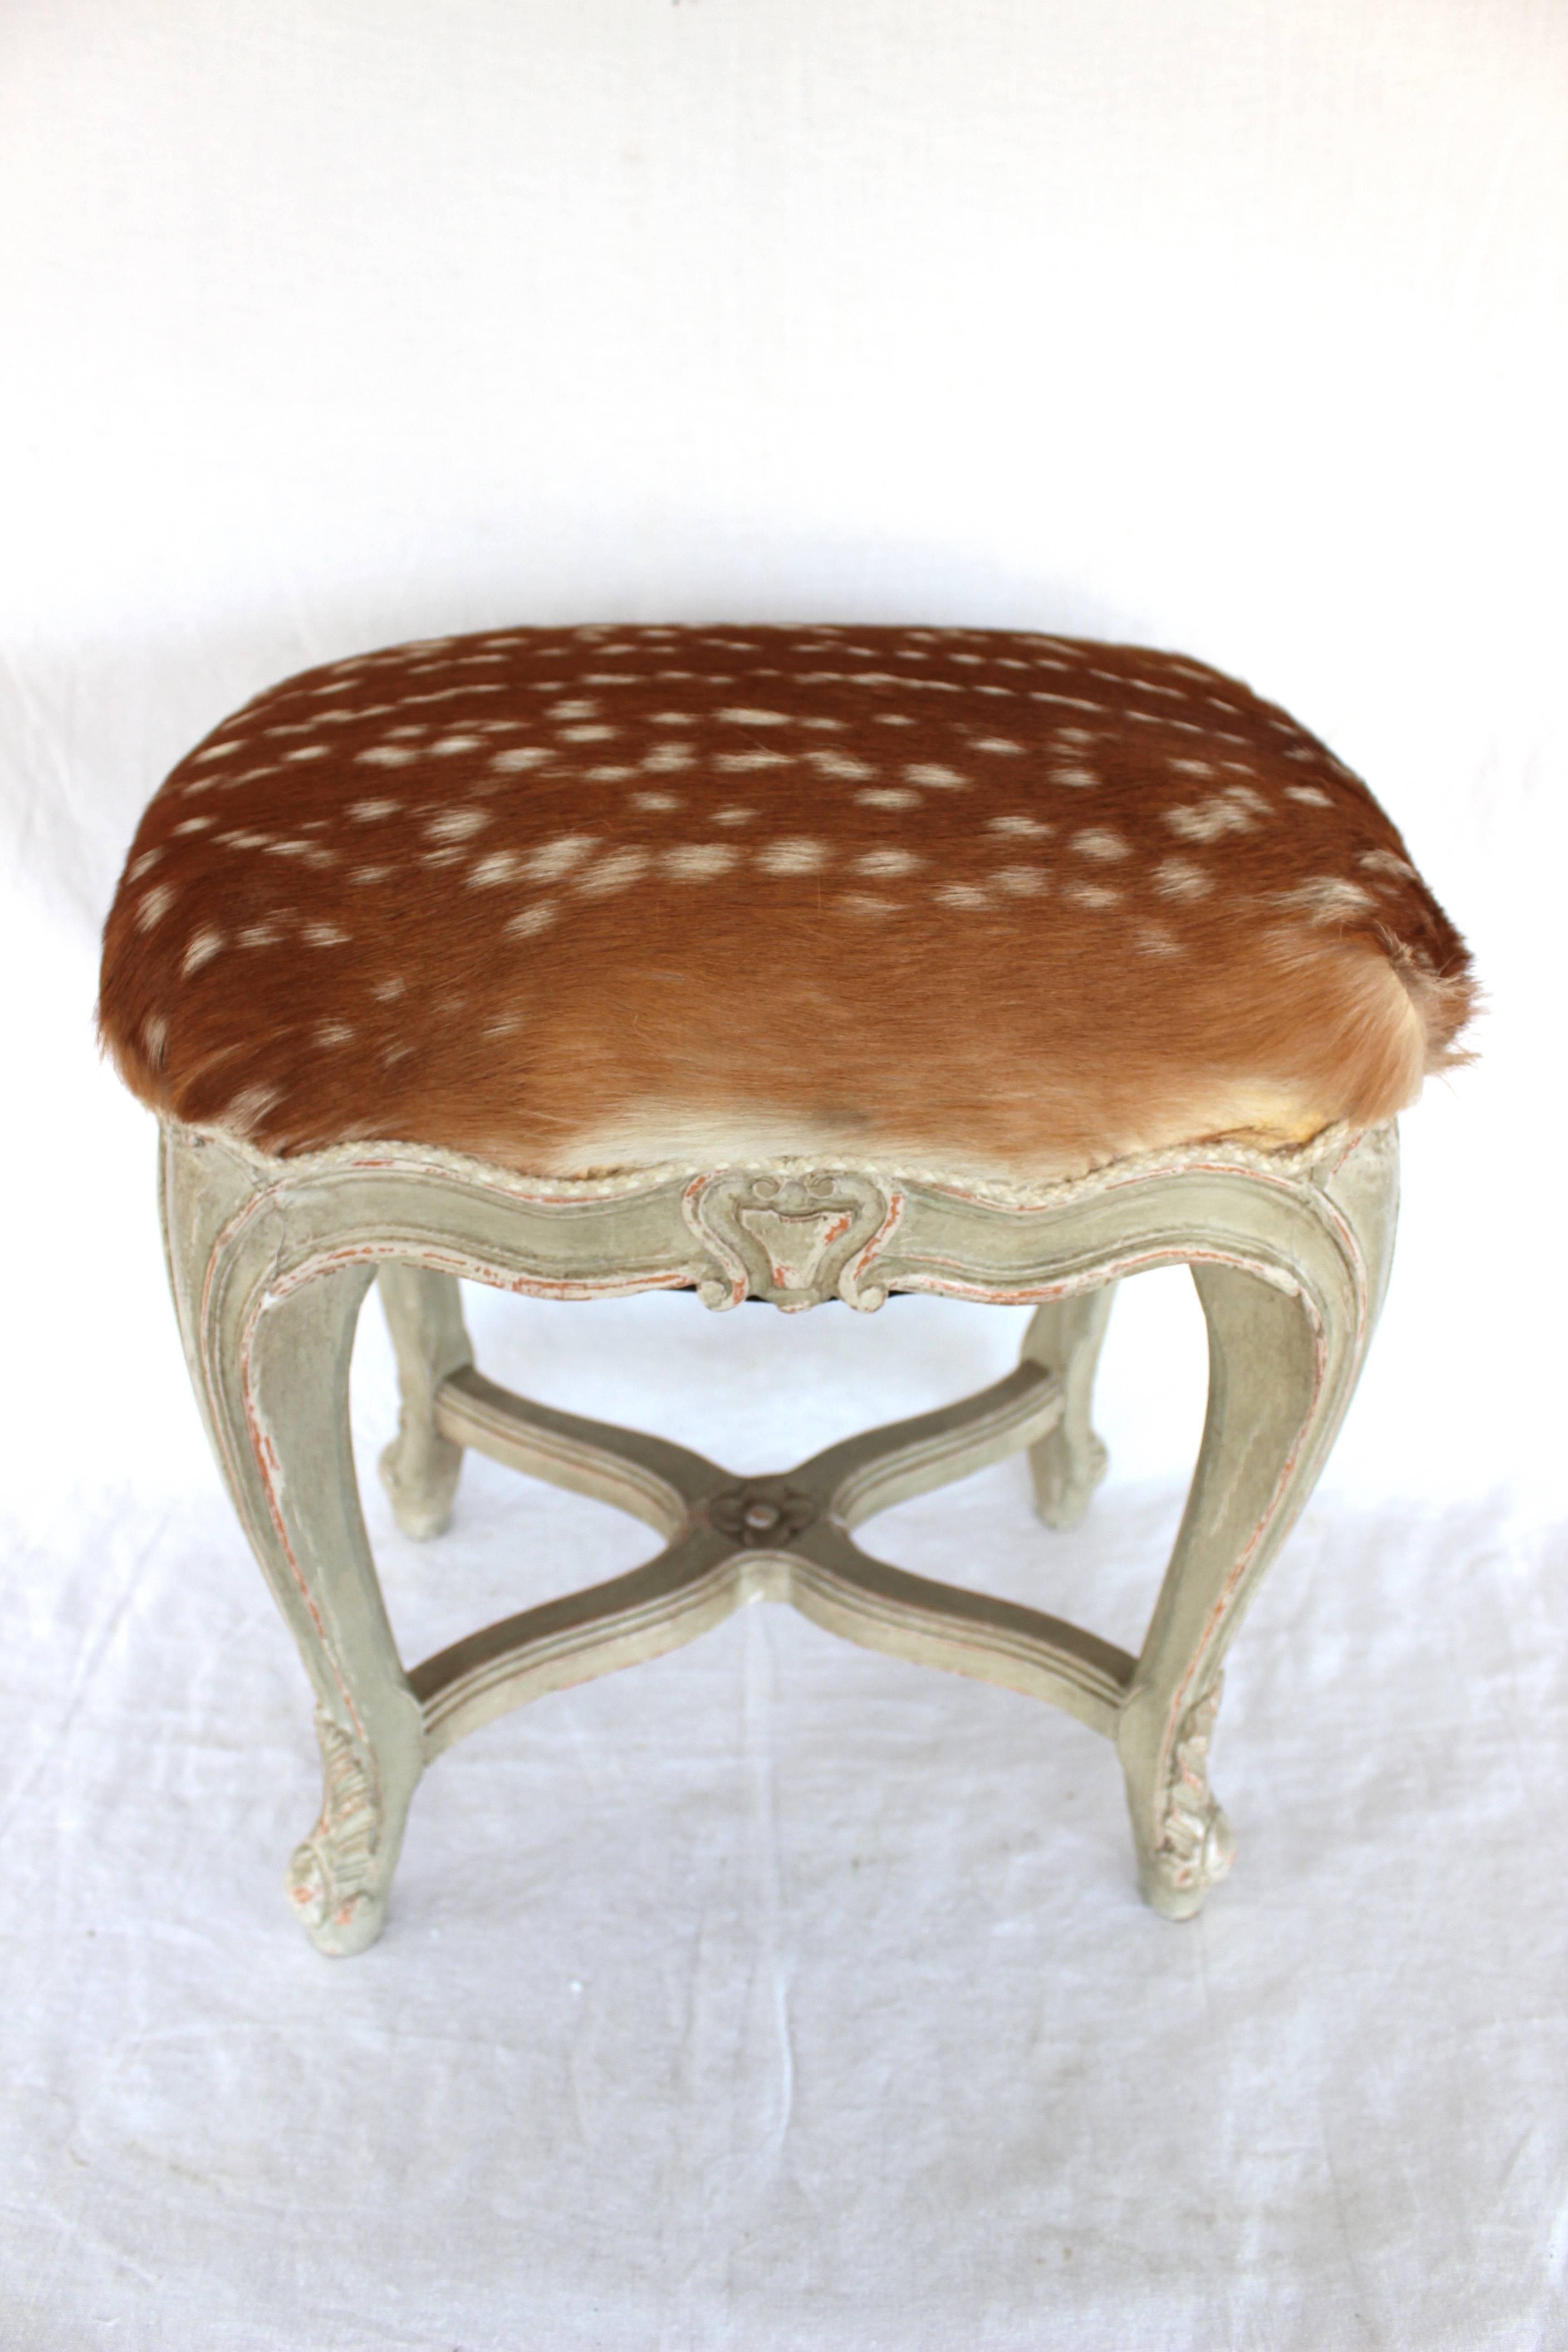 Very elegant Louis XV style stool with deer skin upholstery and Samuel and Sons braided trim.